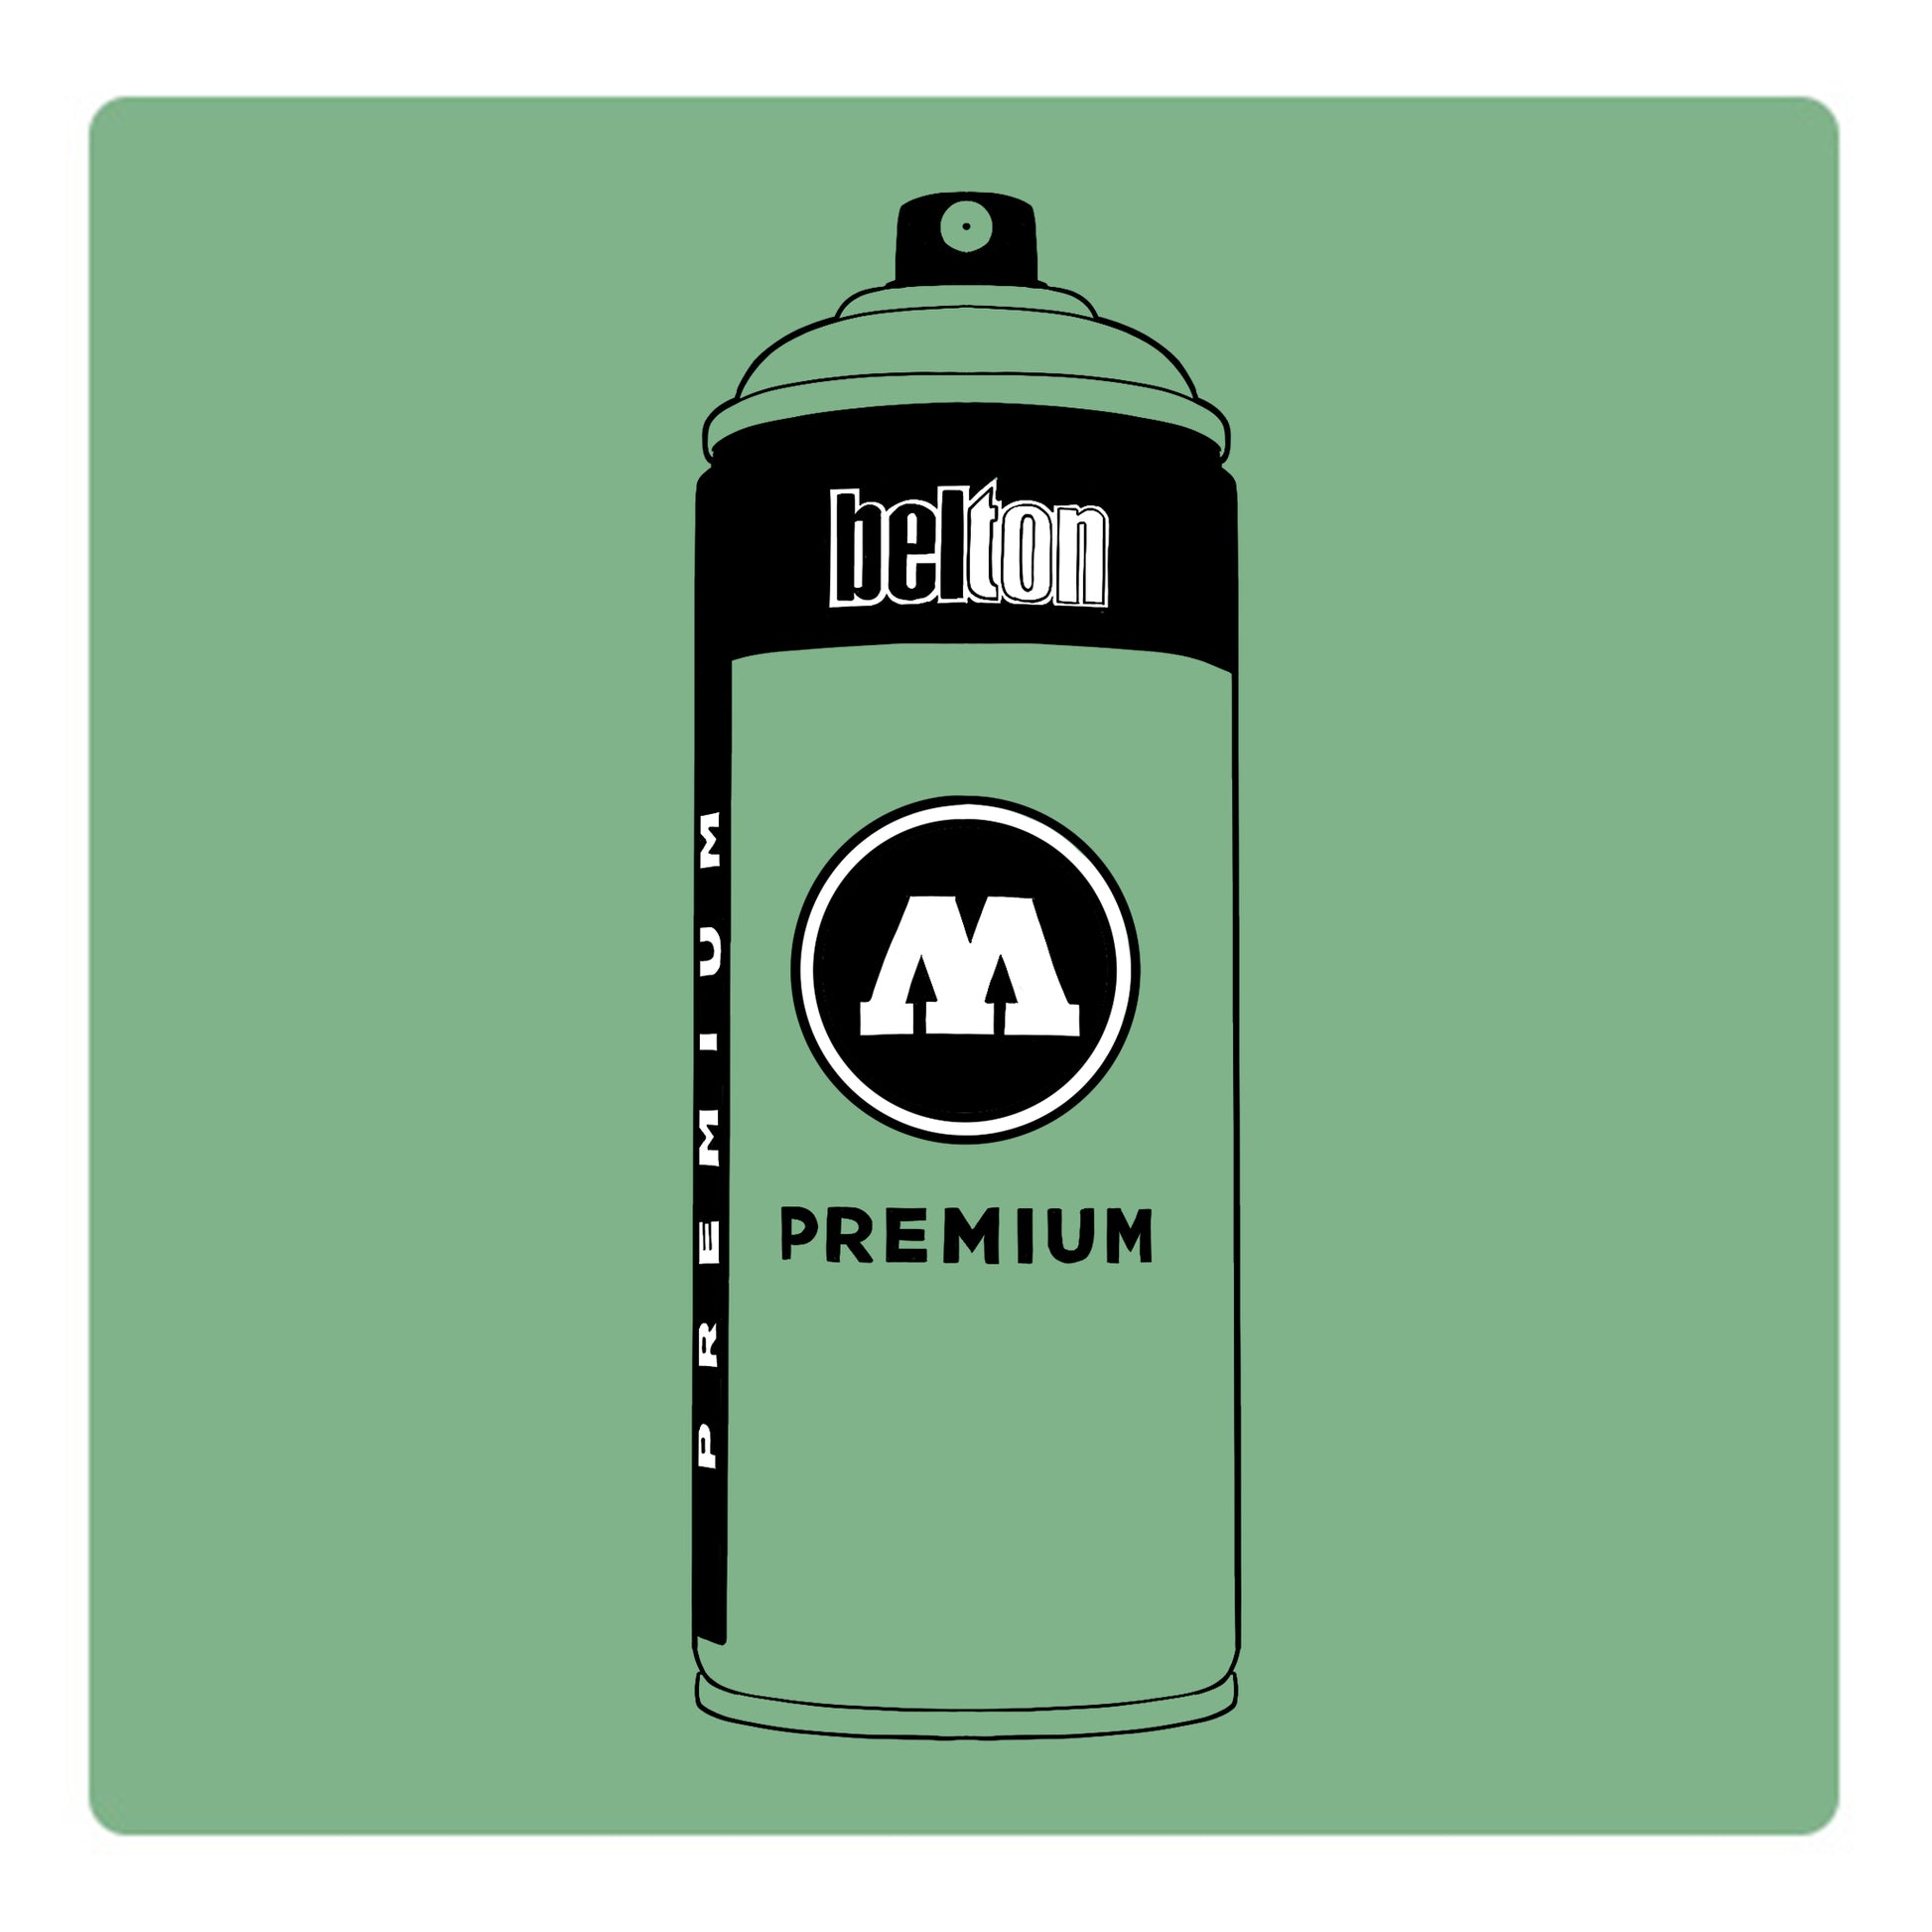 A black outline drawing of a sage green spray paint can with the words "belton","premium" and the letter"M" written on the face in black and white font. The background is a color swatch of the same sage green with a white border